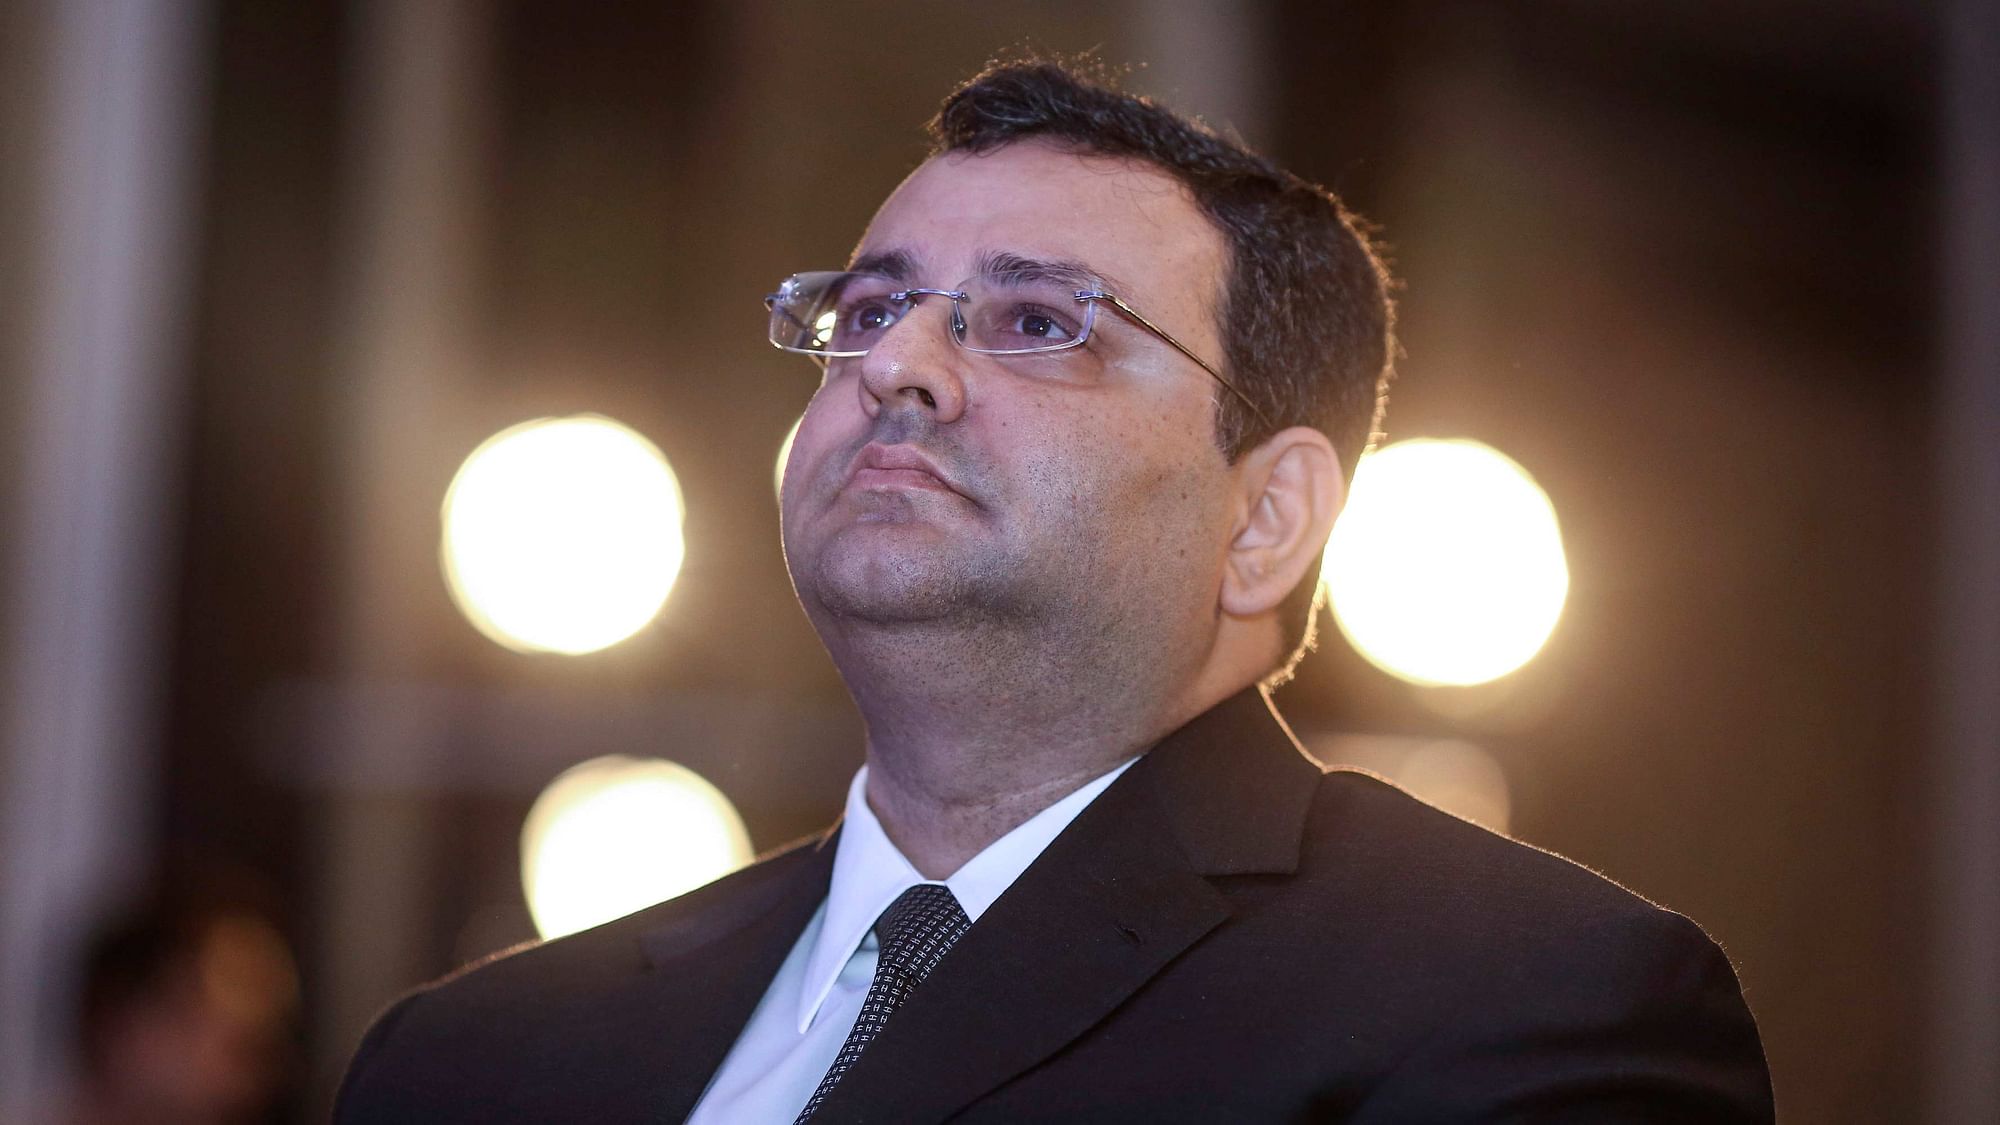 Cyrus Mistry, Chairman of Tata Group, at the Launch of India@75 (Photo: Dhiraj Singh/Bloomberg)